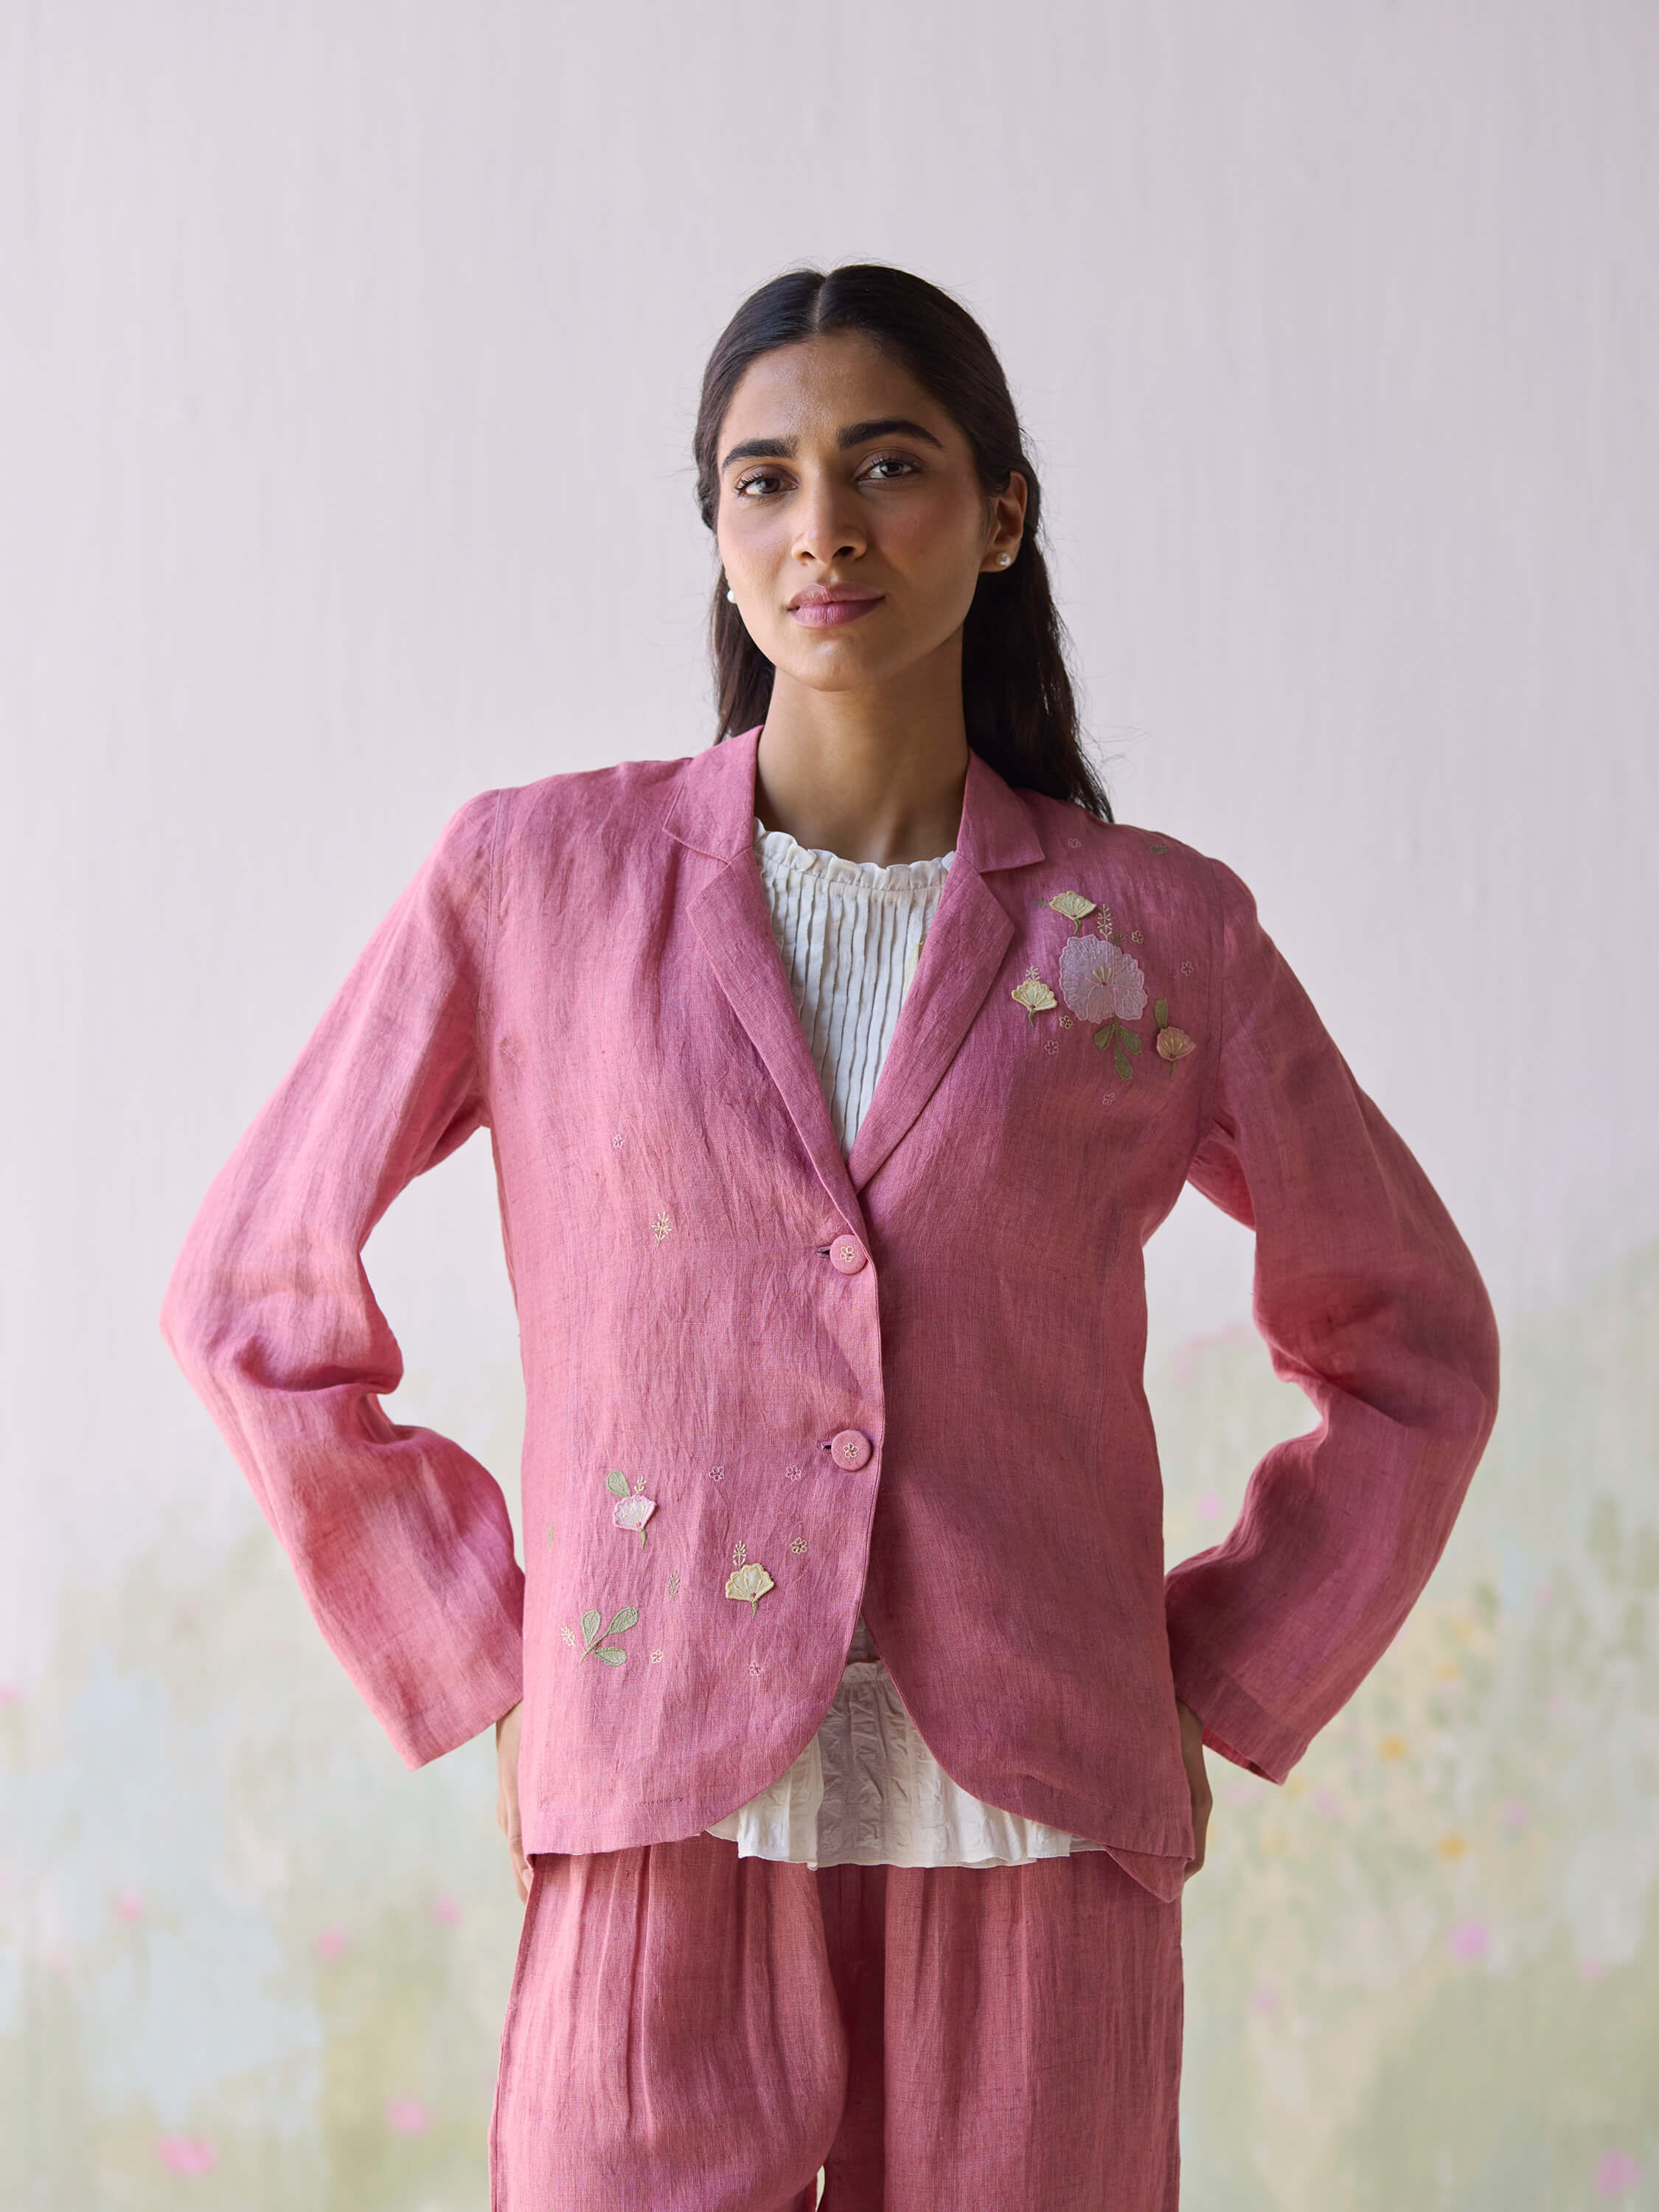 Woman in pink embroidered suit jacket and trousers against a light backdrop.